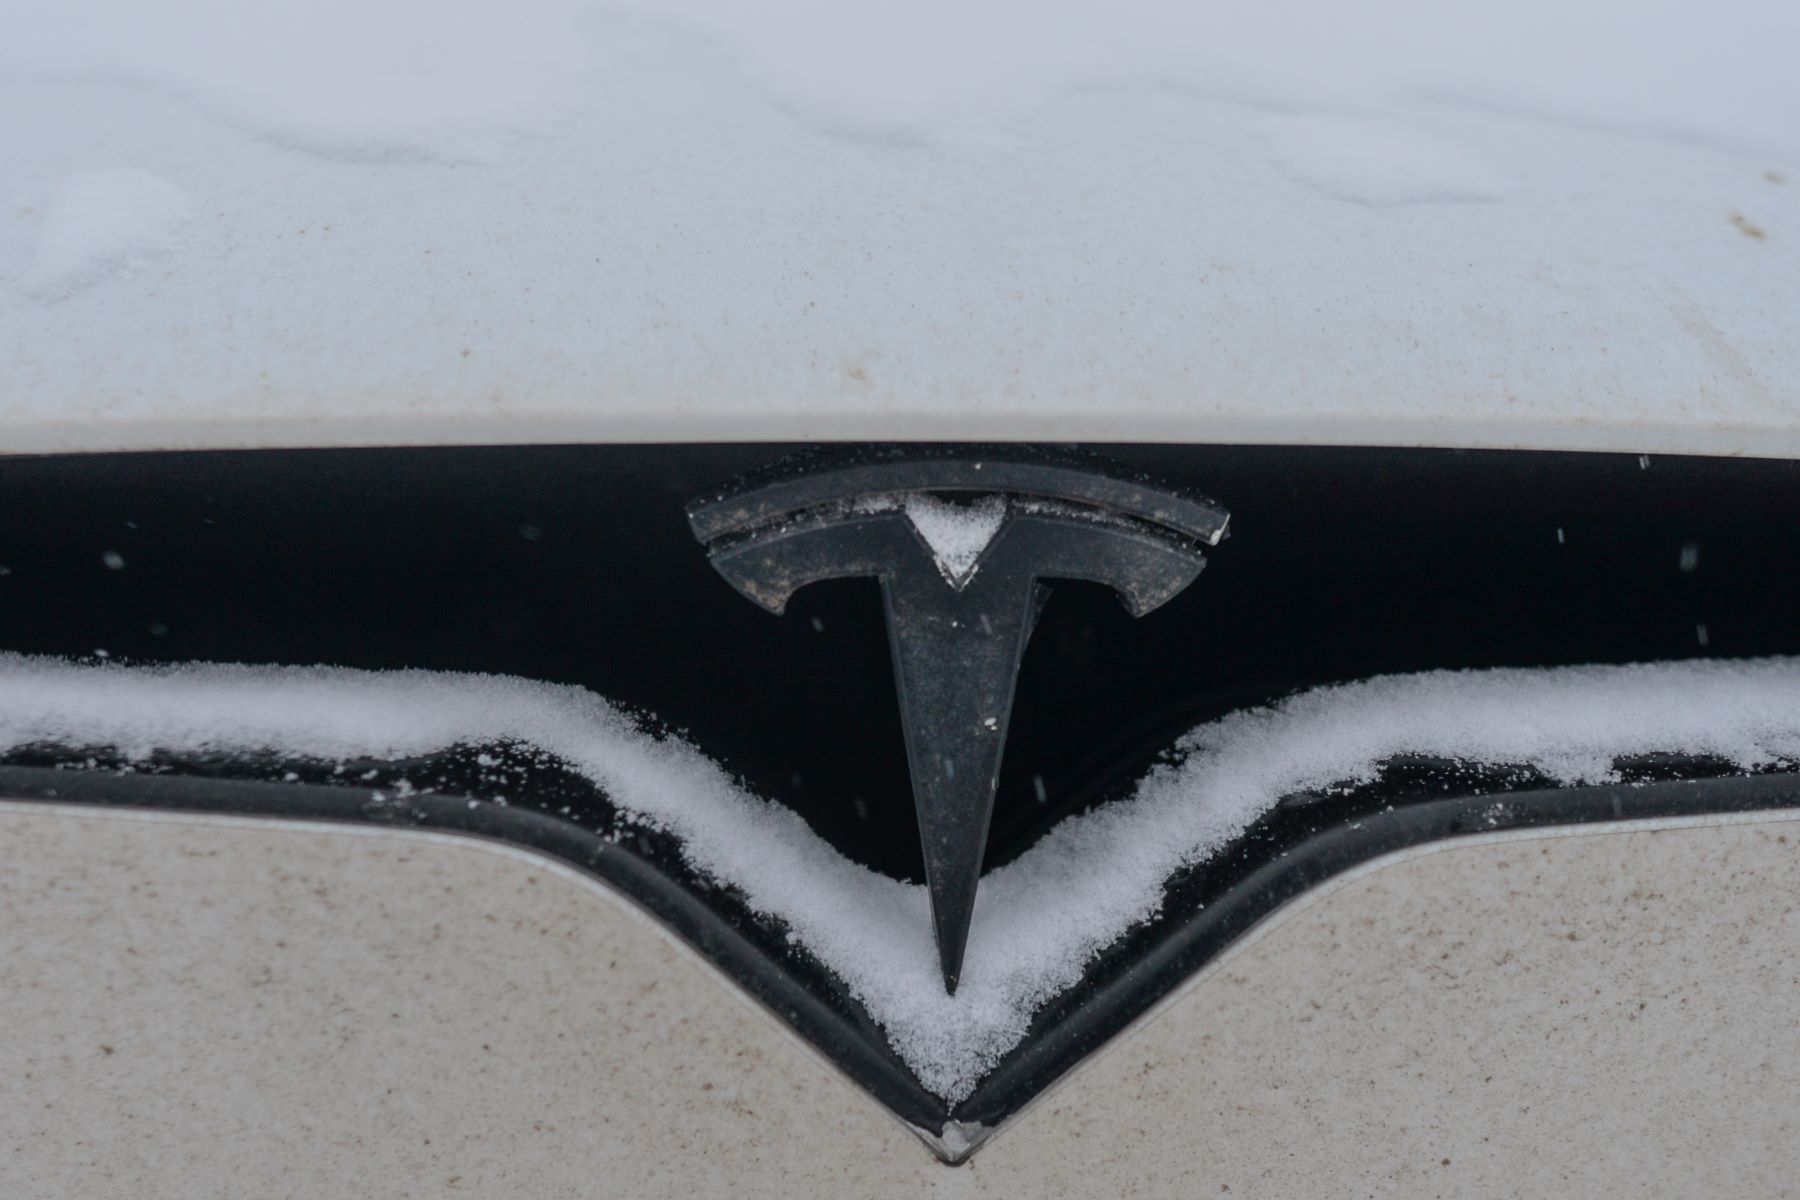 A Tesla EV parked in cold weather and covered in snow in Edmonton, Alberta, Canada